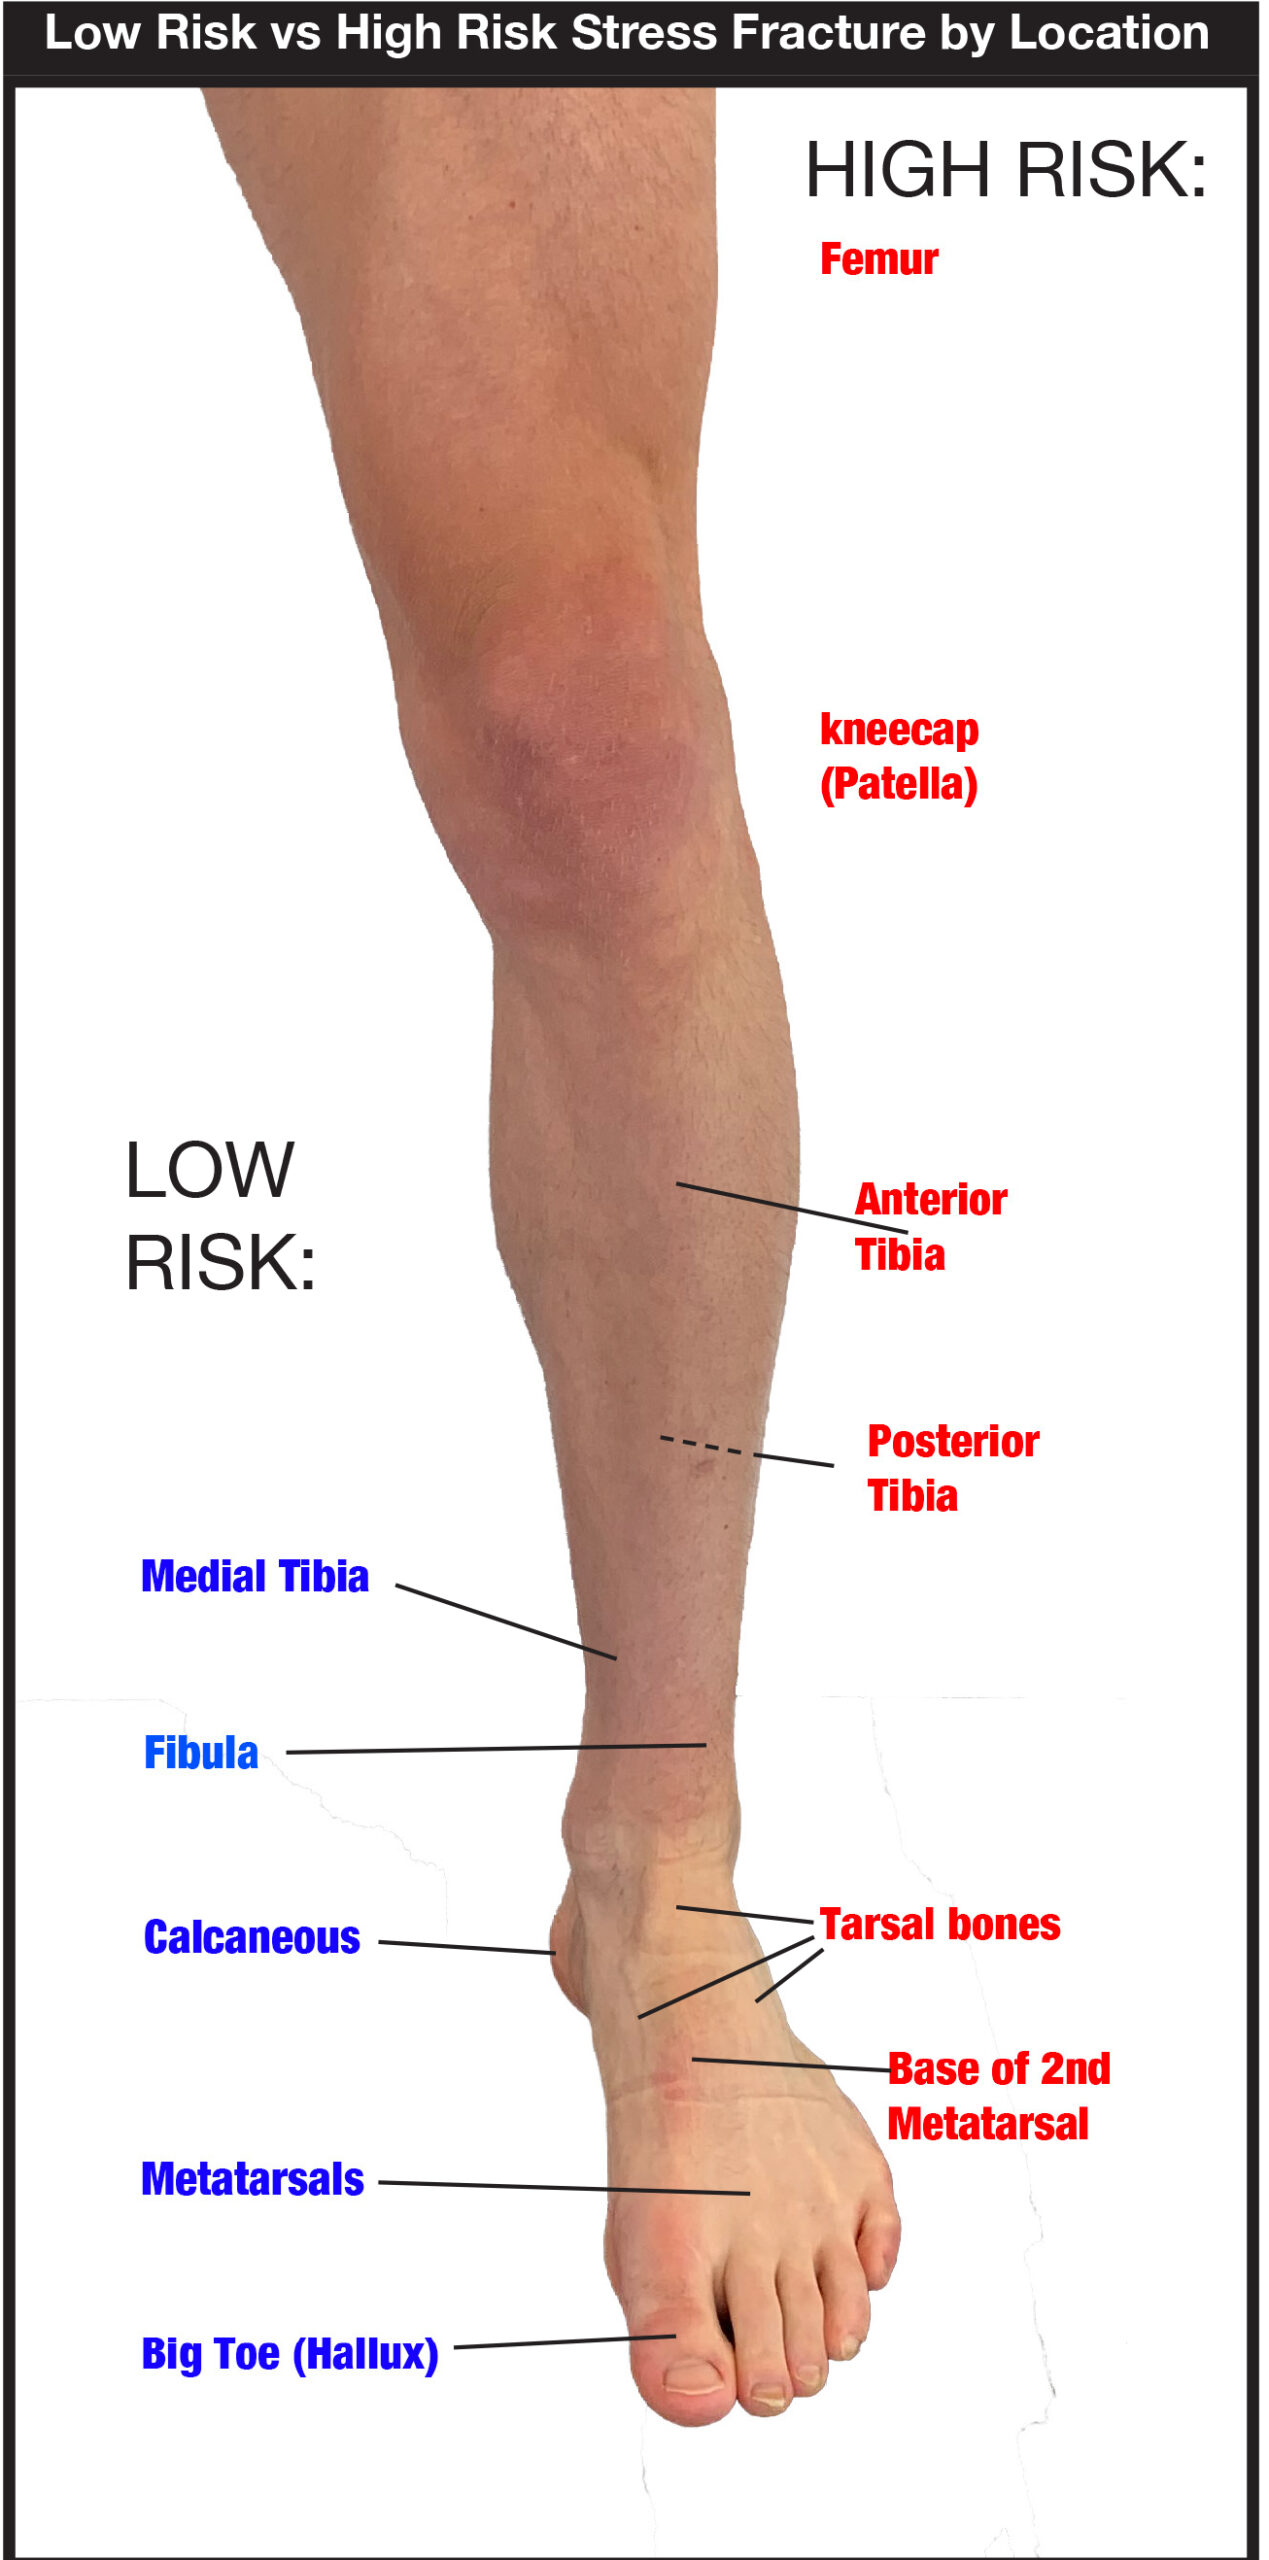 Stress Fracture Risk by Location cropped scaled